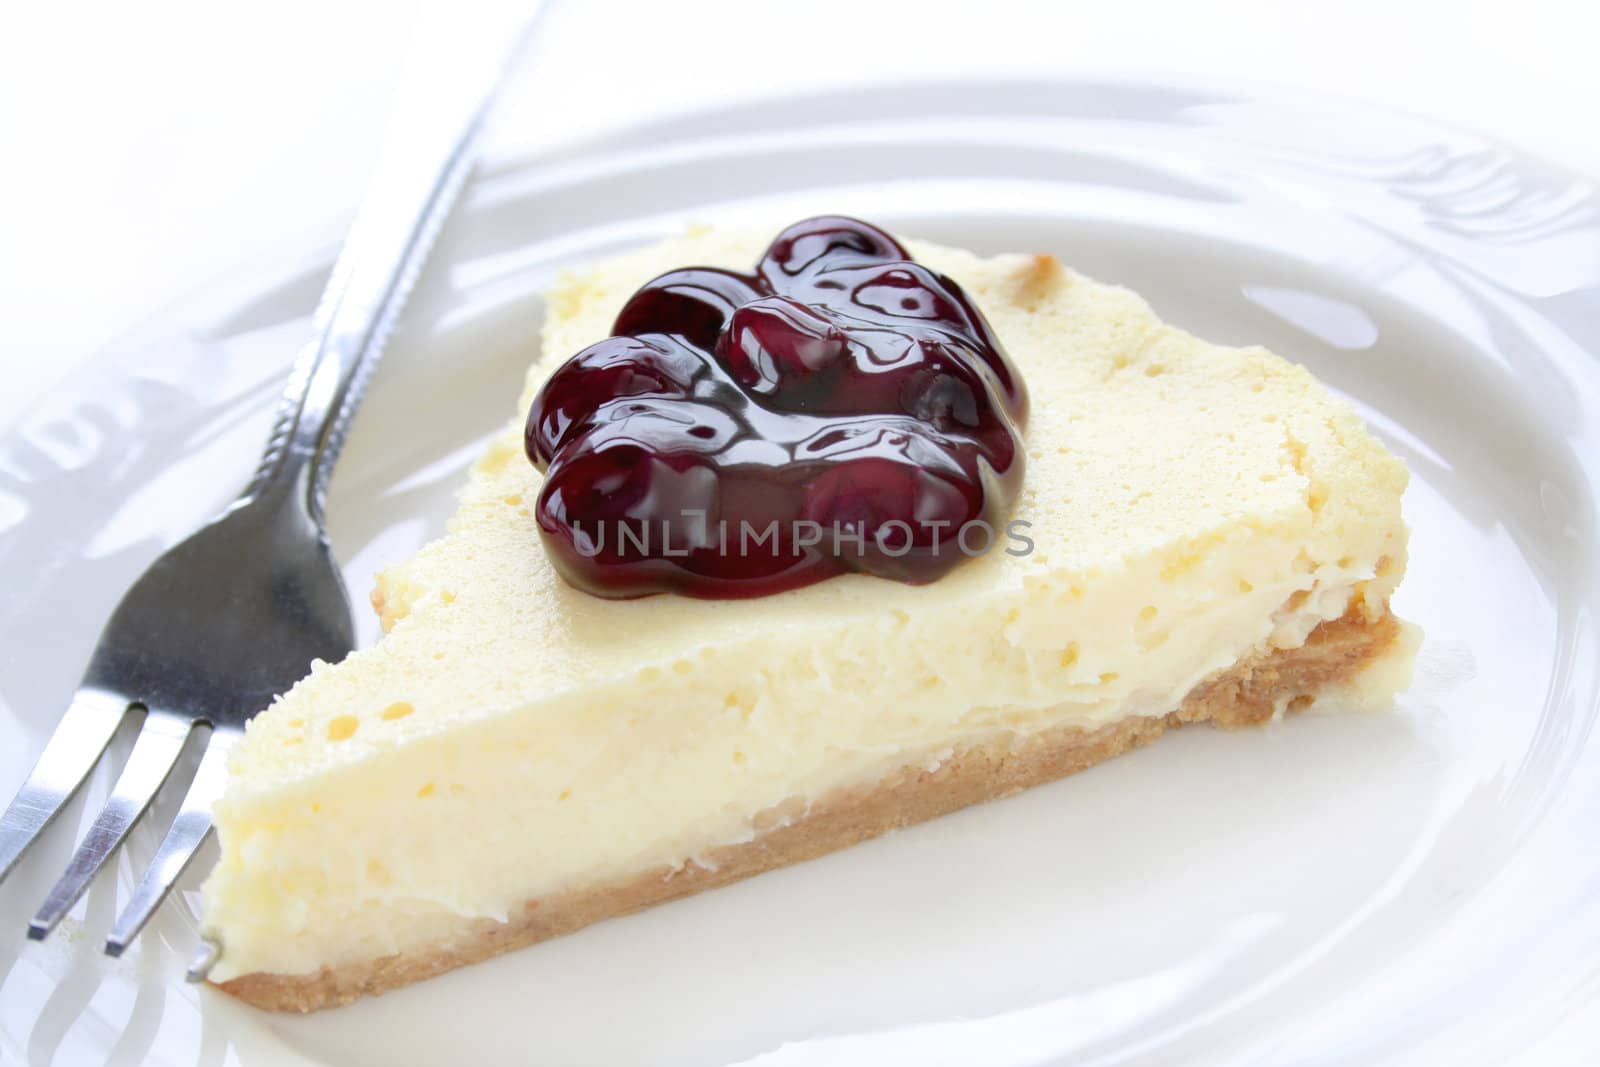 Blueberry Cheesecake by thephotoguy